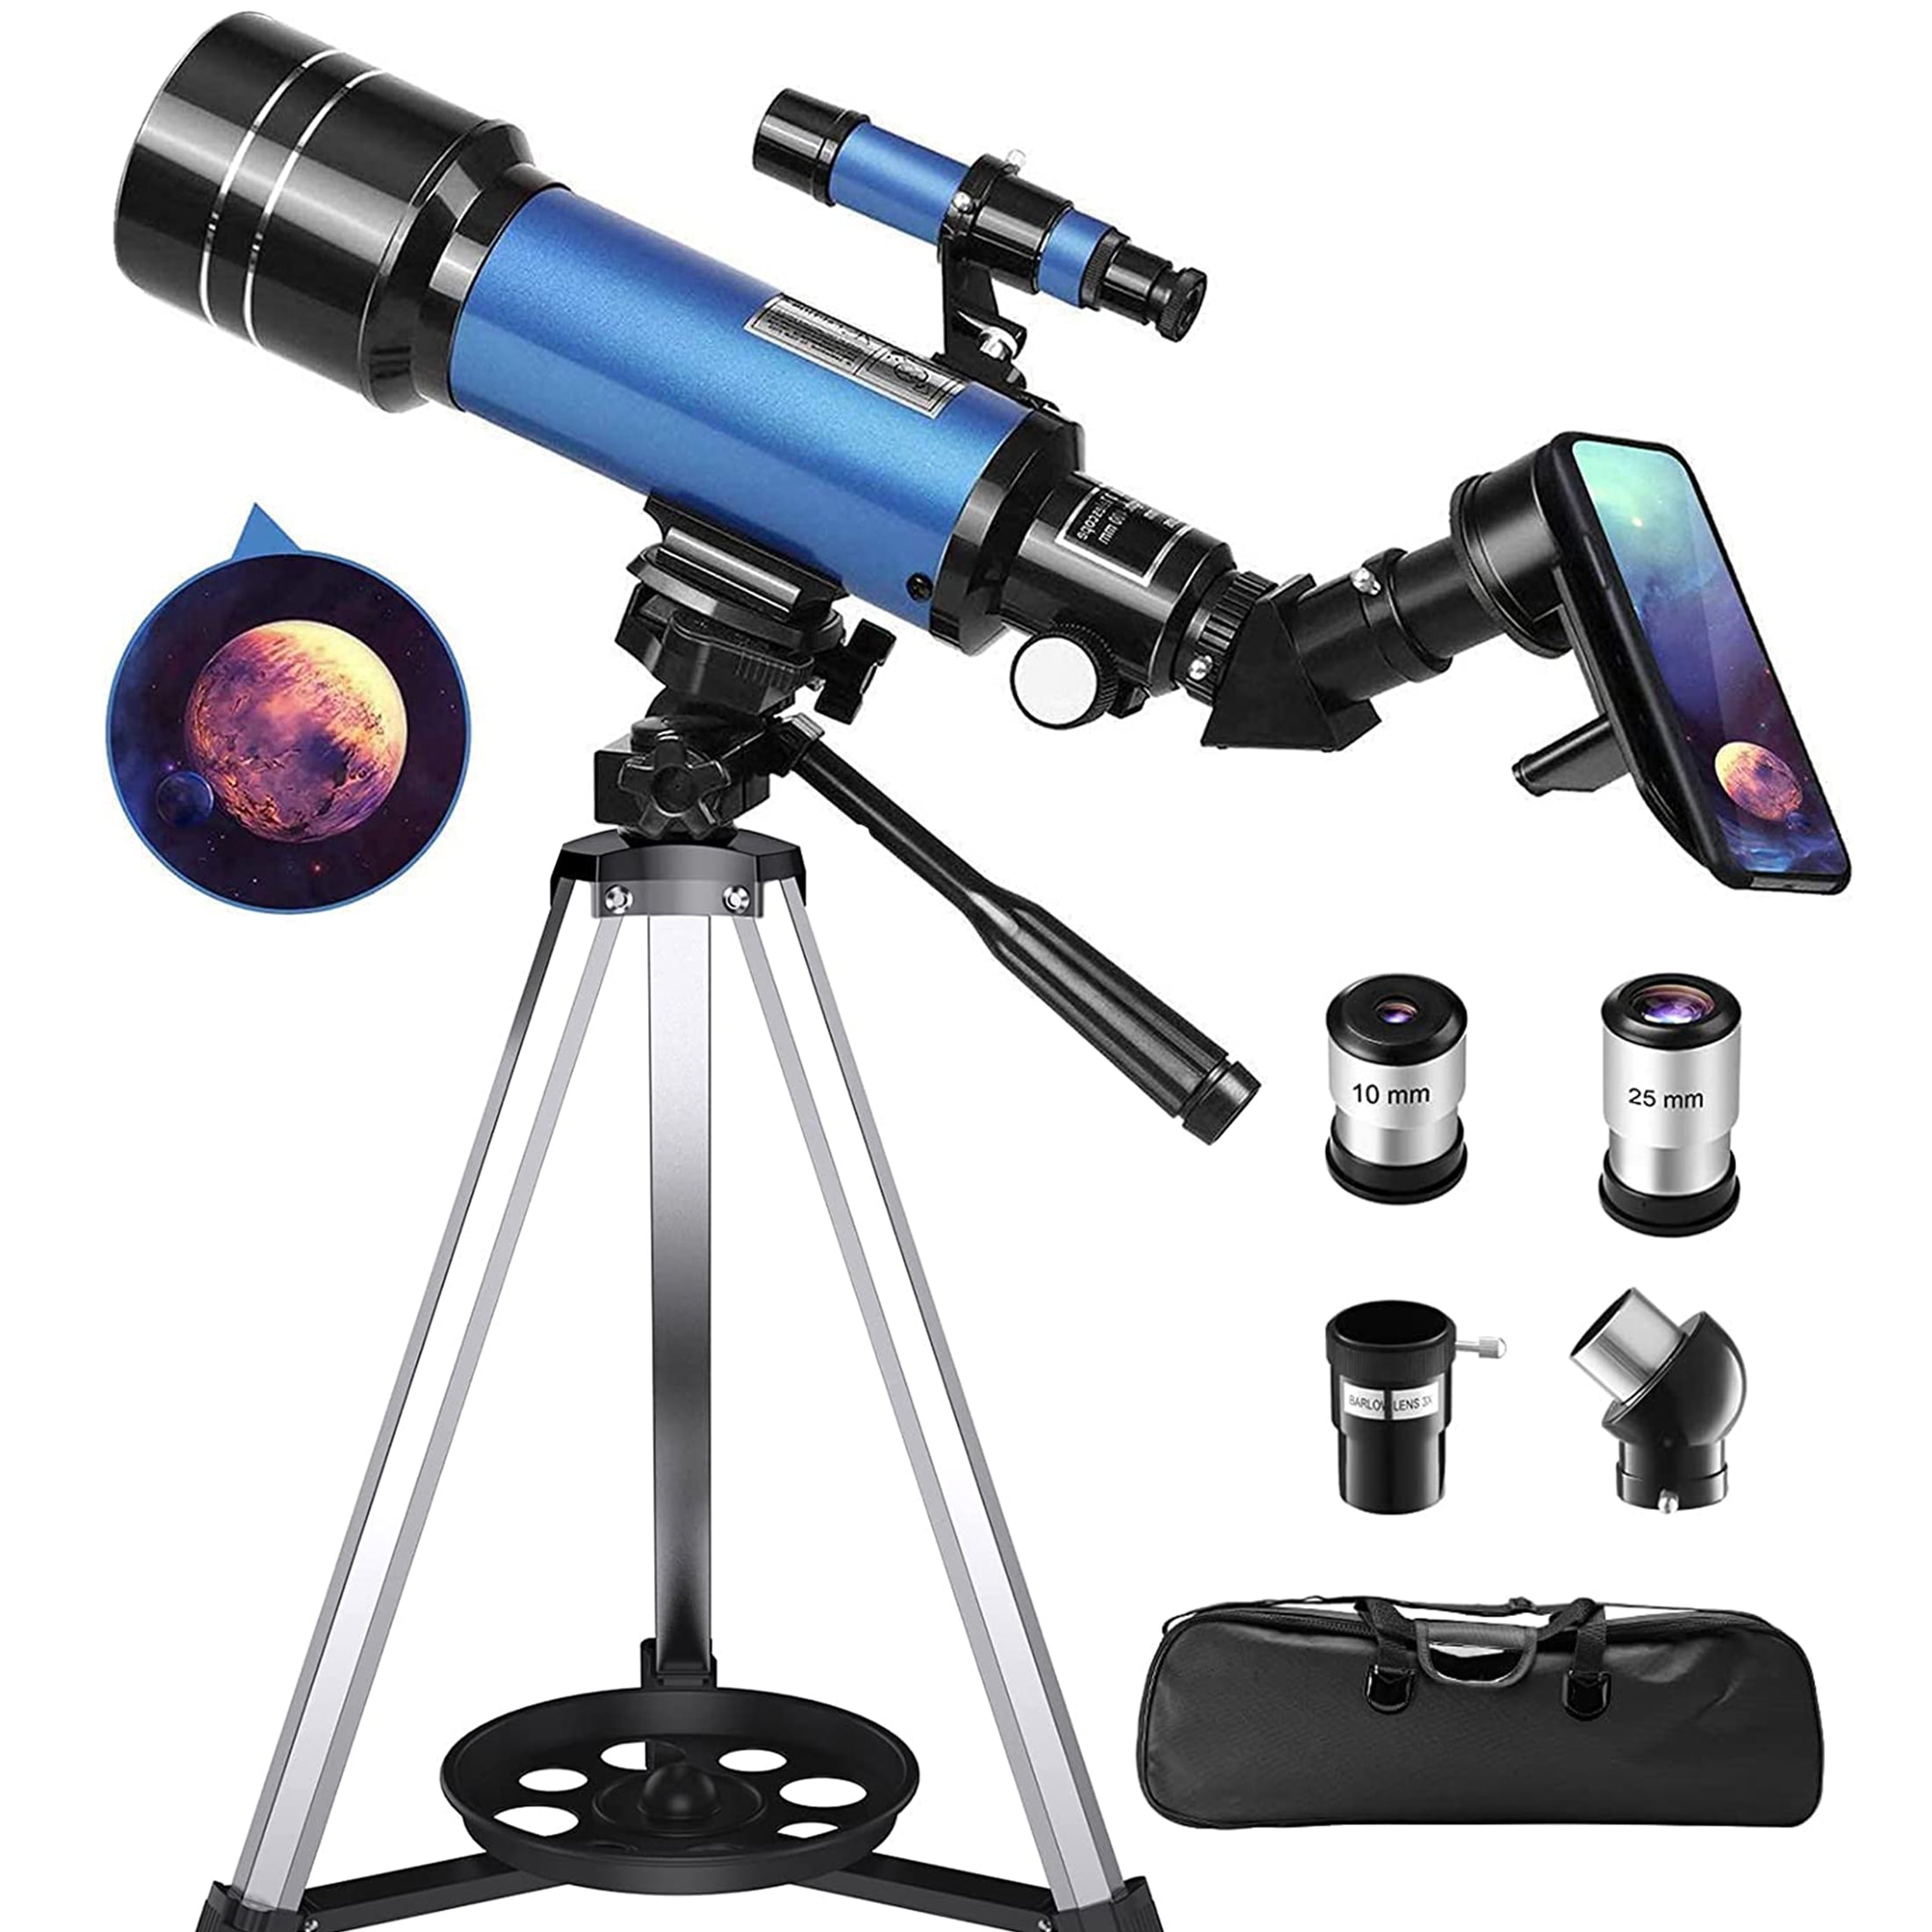 Portable Travel Telescope with Carry Bag vanstarry Telescope for Kids,Travel Kids Telescope 70mm Aperture 400mm AZ Mount Astronomical Refractor Telescope for Astronomy Beginners Smartphone Holder 